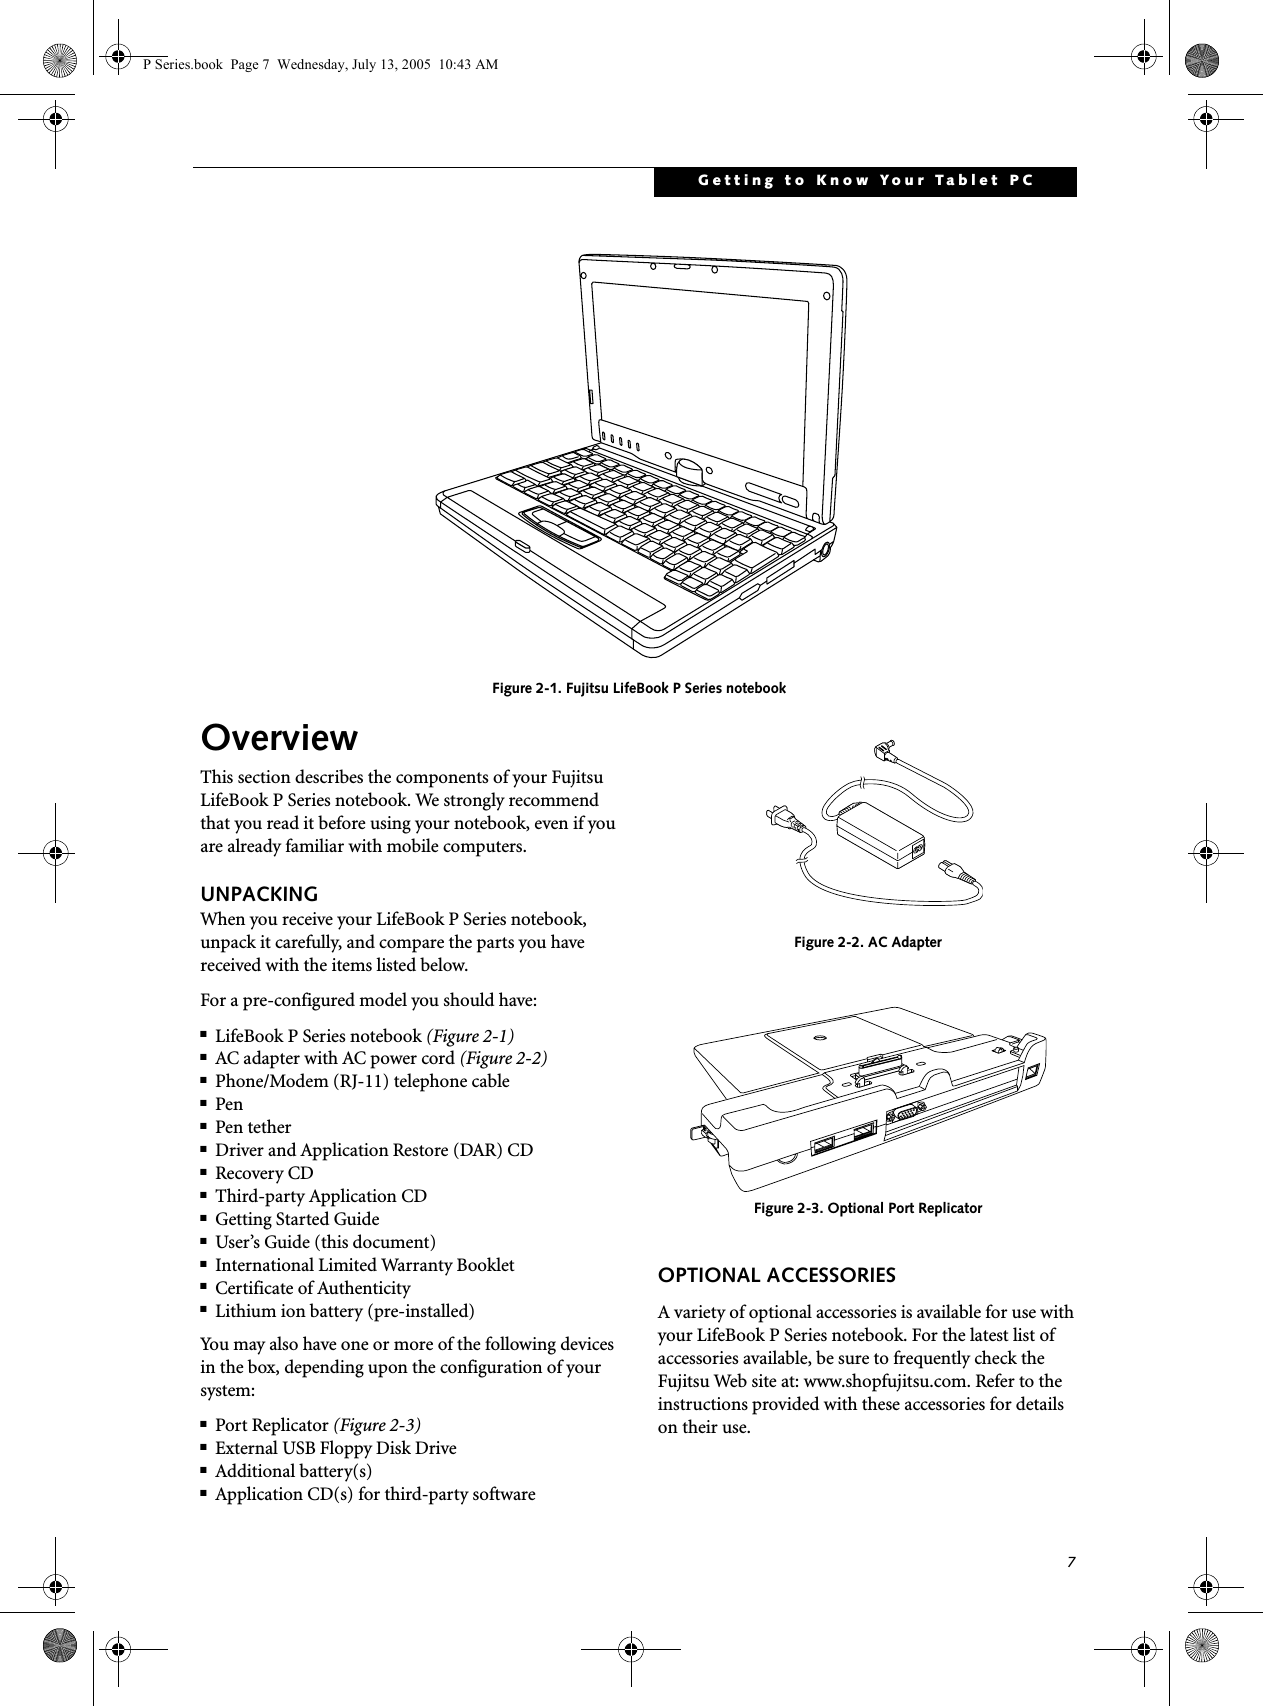 7Getting to Know Your Tablet PC Figure 2-1. Fujitsu LifeBook P Series notebook OverviewThis section describes the components of your Fujitsu LifeBook P Series notebook. We strongly recommend that you read it before using your notebook, even if you are already familiar with mobile computers.UNPACKINGWhen you receive your LifeBook P Series notebook, unpack it carefully, and compare the parts you have received with the items listed below.For a pre-configured model you should have:■LifeBook P Series notebook (Figure 2-1)■AC adapter with AC power cord (Figure 2-2)■Phone/Modem (RJ-11) telephone cable■Pen■Pen tether■Driver and Application Restore (DAR) CD■Recovery CD■Third-party Application CD■Getting Started Guide■User’s Guide (this document)■International Limited Warranty Booklet■Certificate of Authenticity■Lithium ion battery (pre-installed)You may also have one or more of the following devices in the box, depending upon the configuration of your system:■Port Replicator (Figure 2-3)■External USB Floppy Disk Drive■Additional battery(s)■Application CD(s) for third-party software Figure 2-2. AC AdapterFigure 2-3. Optional Port ReplicatorOPTIONAL ACCESSORIESA variety of optional accessories is available for use with your LifeBook P Series notebook. For the latest list of accessories available, be sure to frequently check the Fujitsu Web site at: www.shopfujitsu.com. Refer to the instructions provided with these accessories for details on their use.P Series.book  Page 7  Wednesday, July 13, 2005  10:43 AM